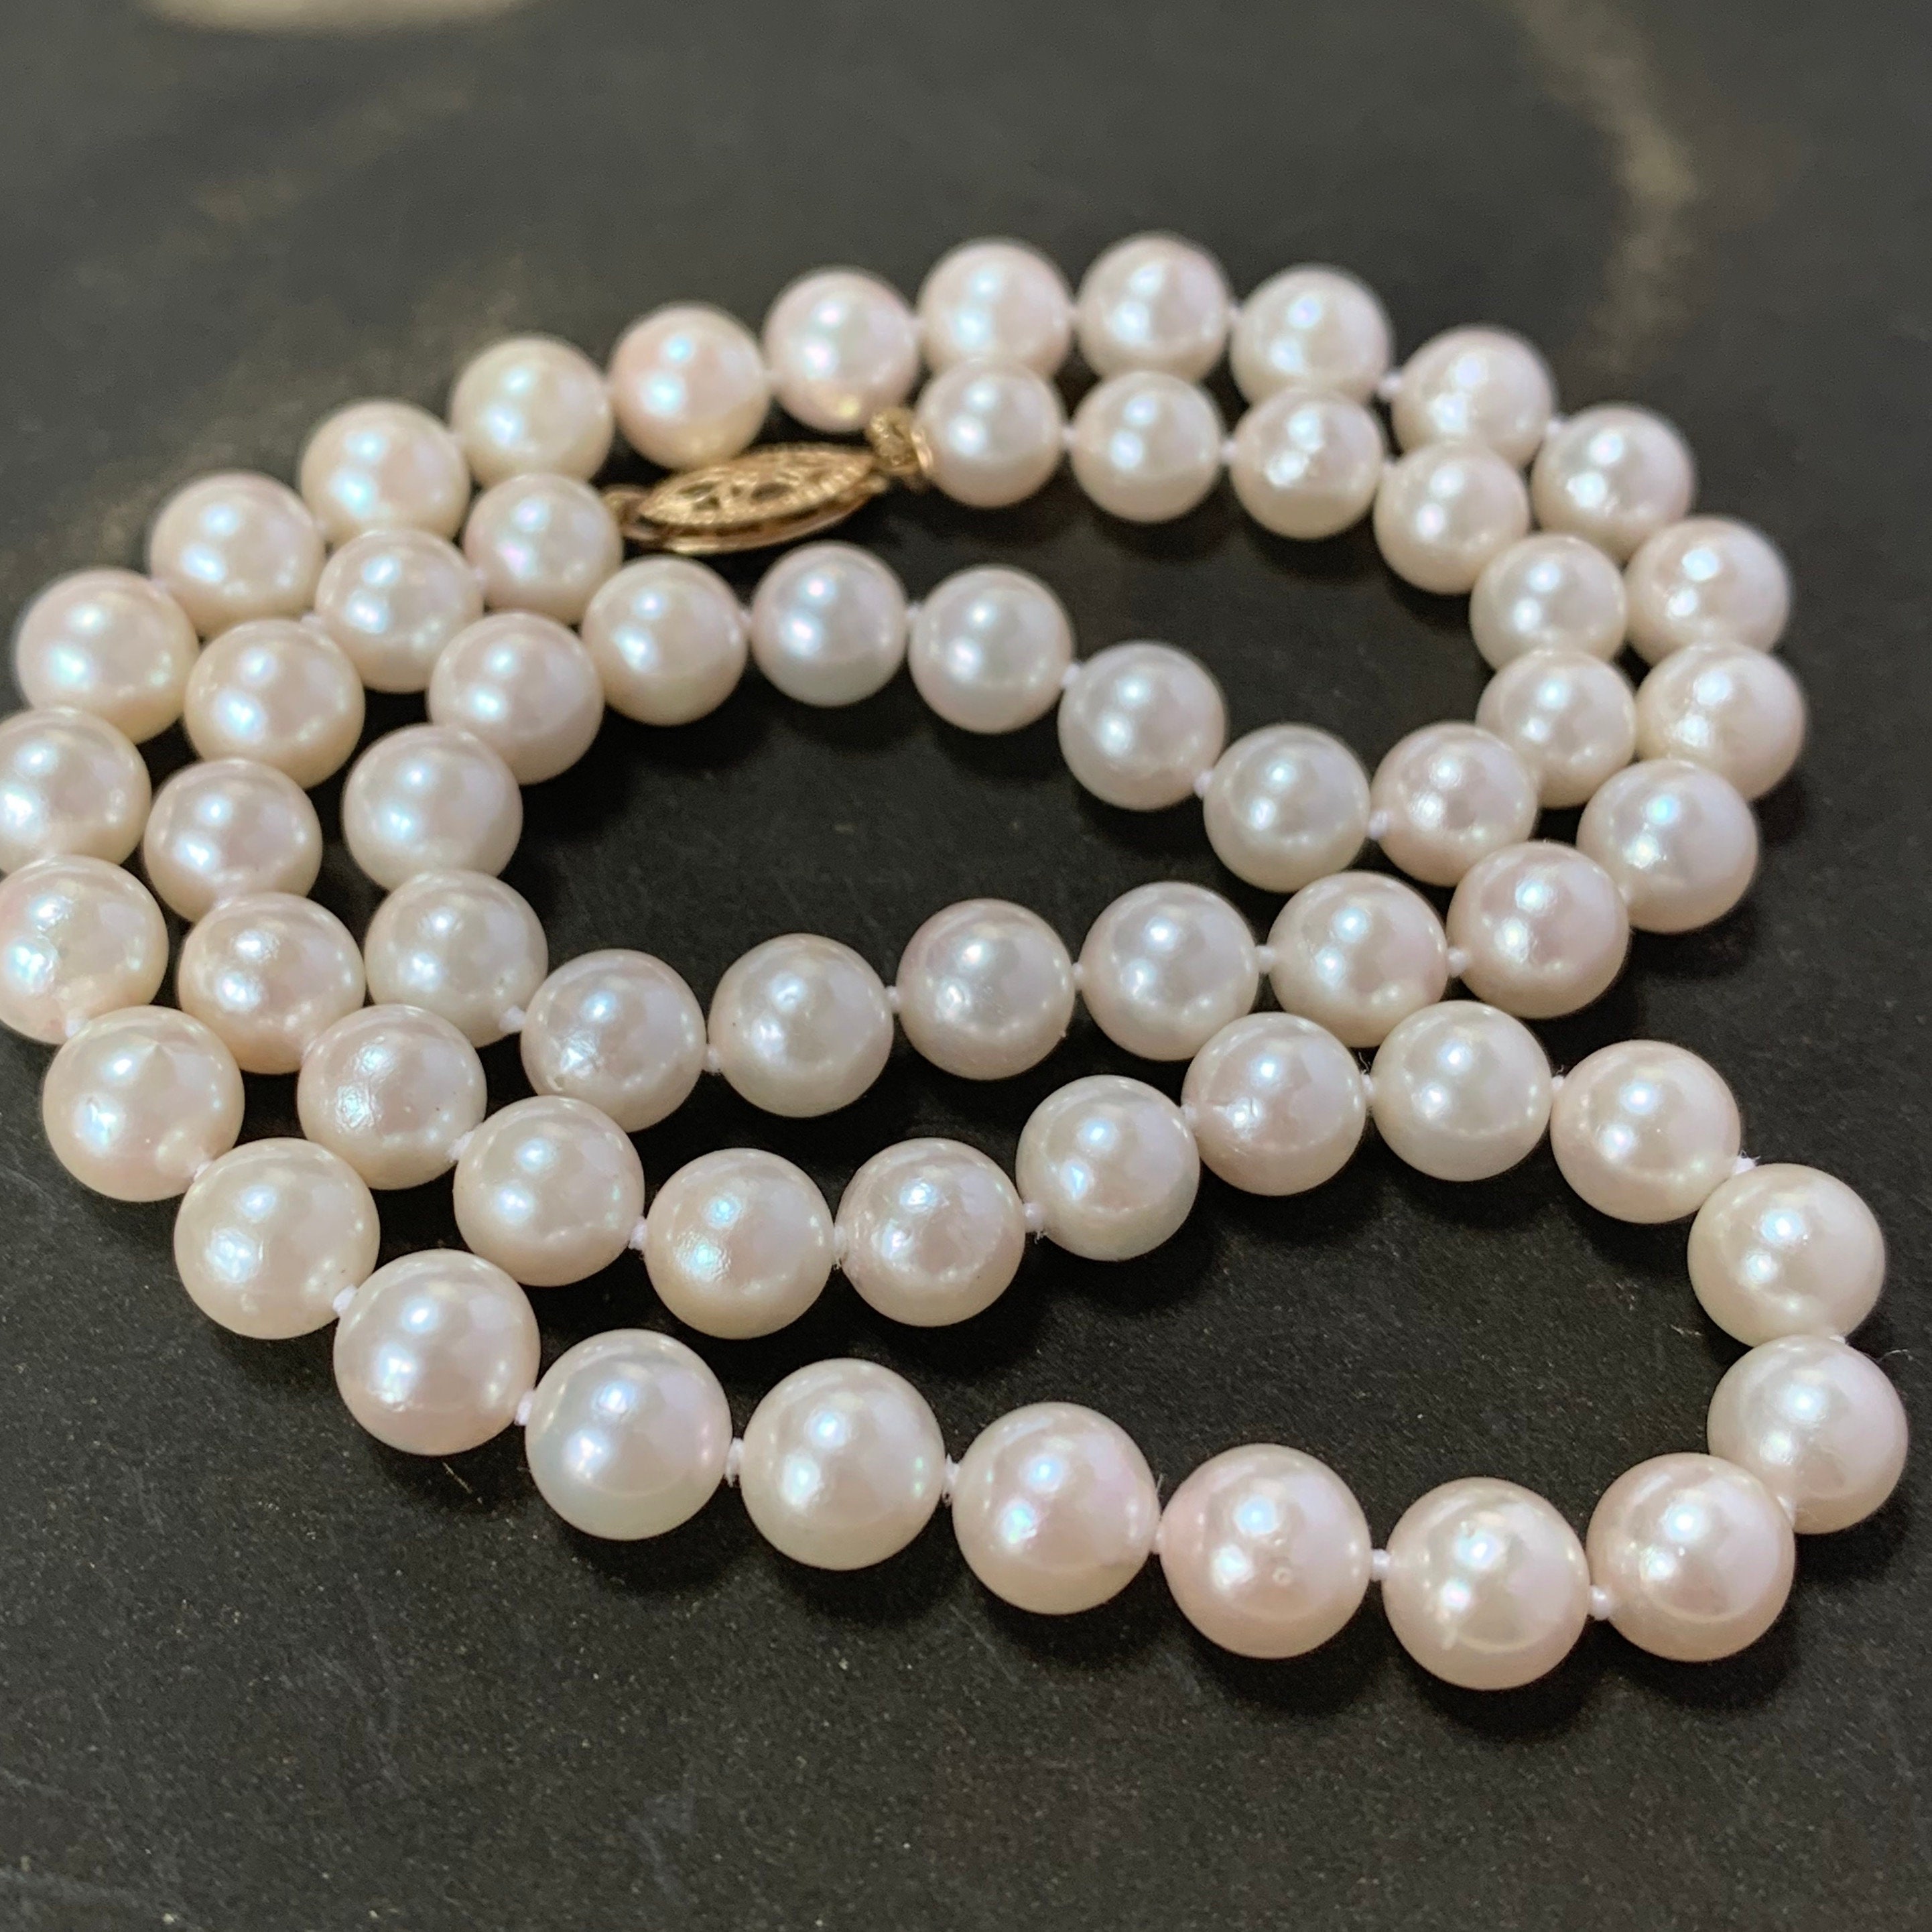 Amazing Cultured Pearl Necklace With 14K Gold Clasp Vintage 6.8mm Pearls Length Of 46cm Or 18 Inches